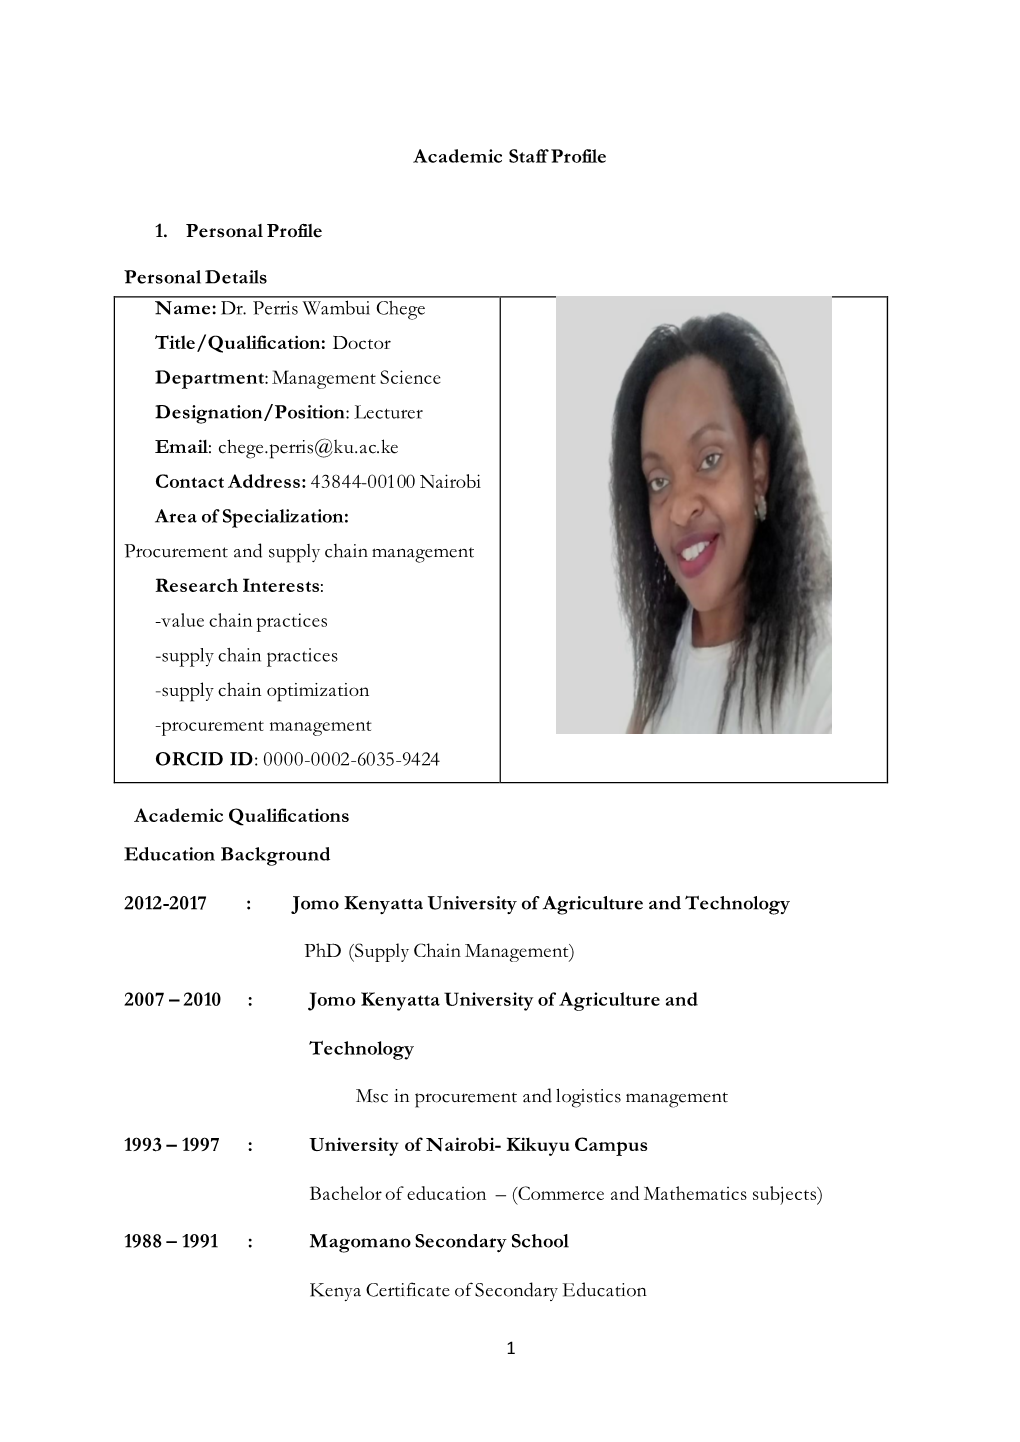 Dr. Perris Wambui Chege Title/Qualification: Doctor Department